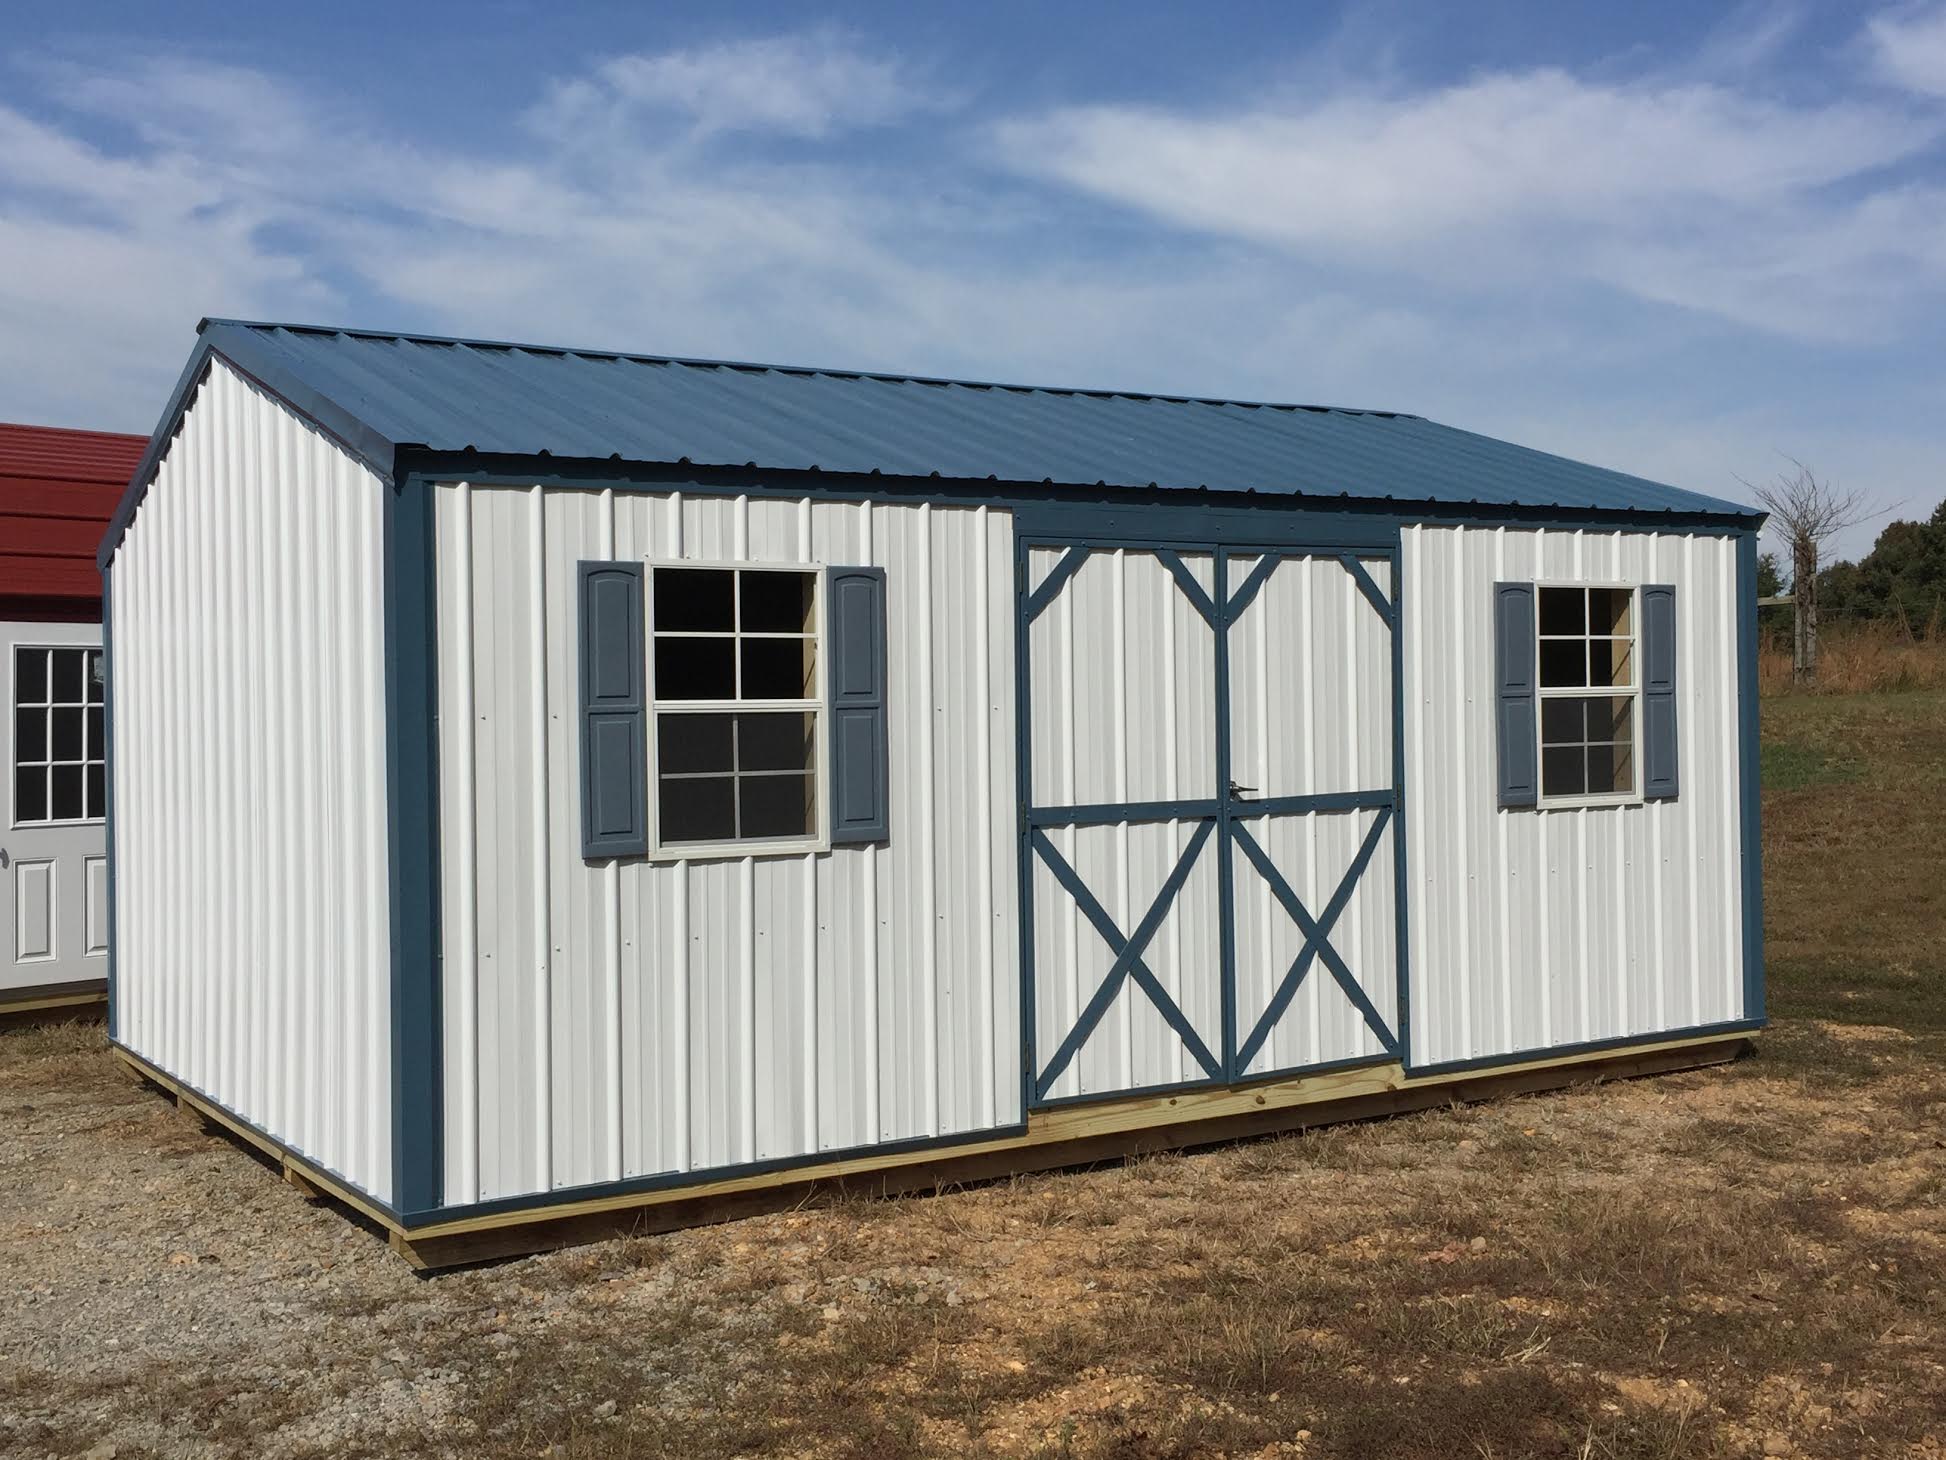 White metal garden shed with blue trim and roof